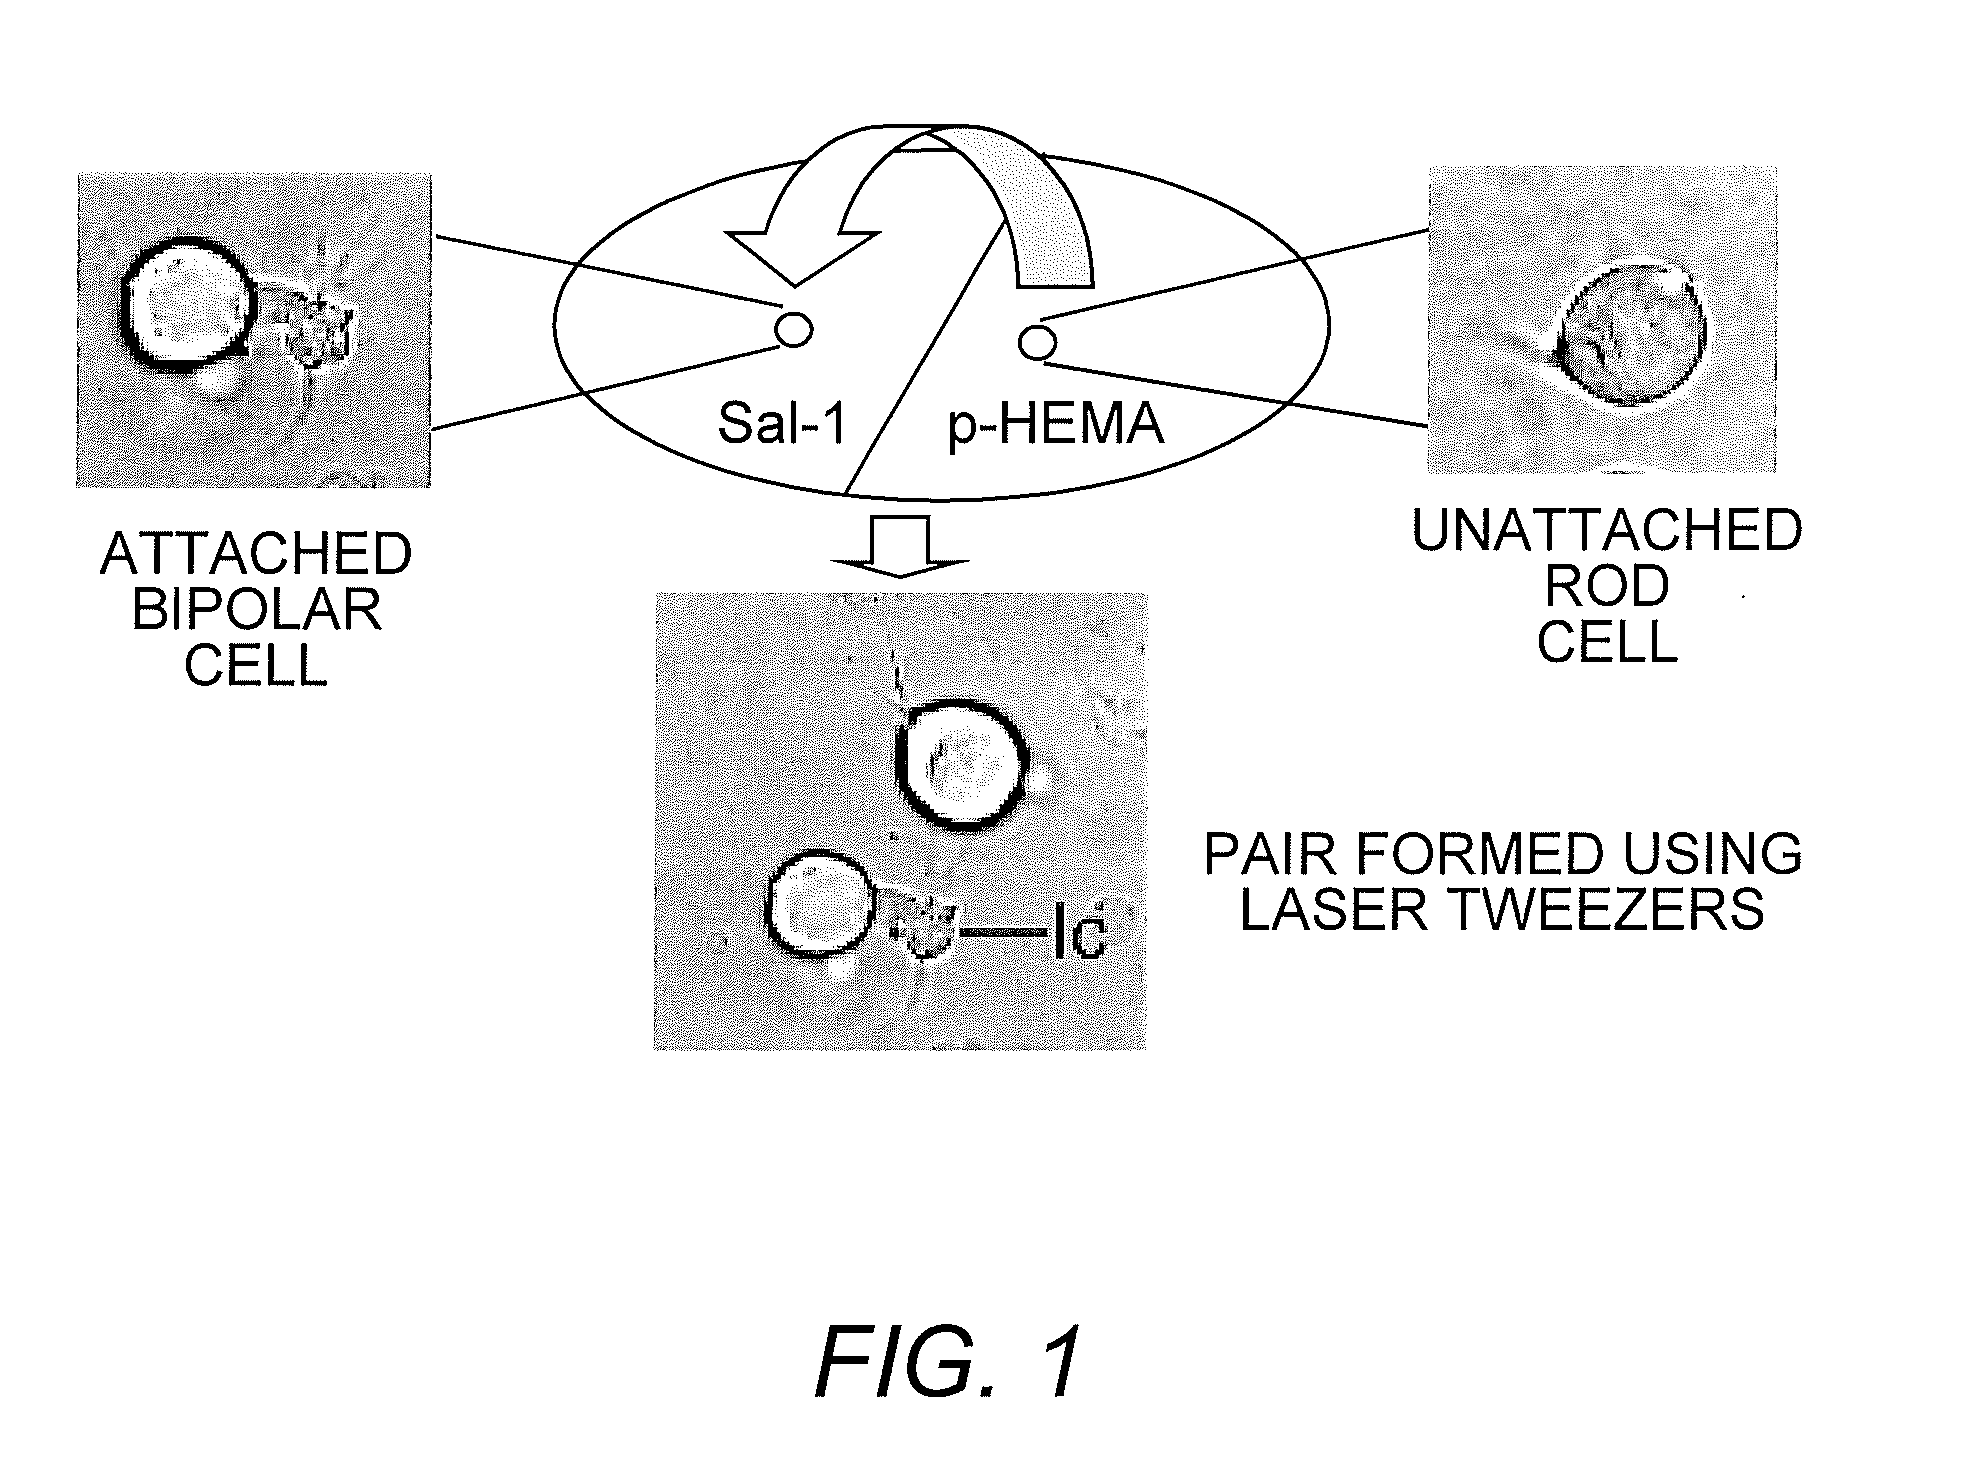 Method for Micromanipulation of Cells